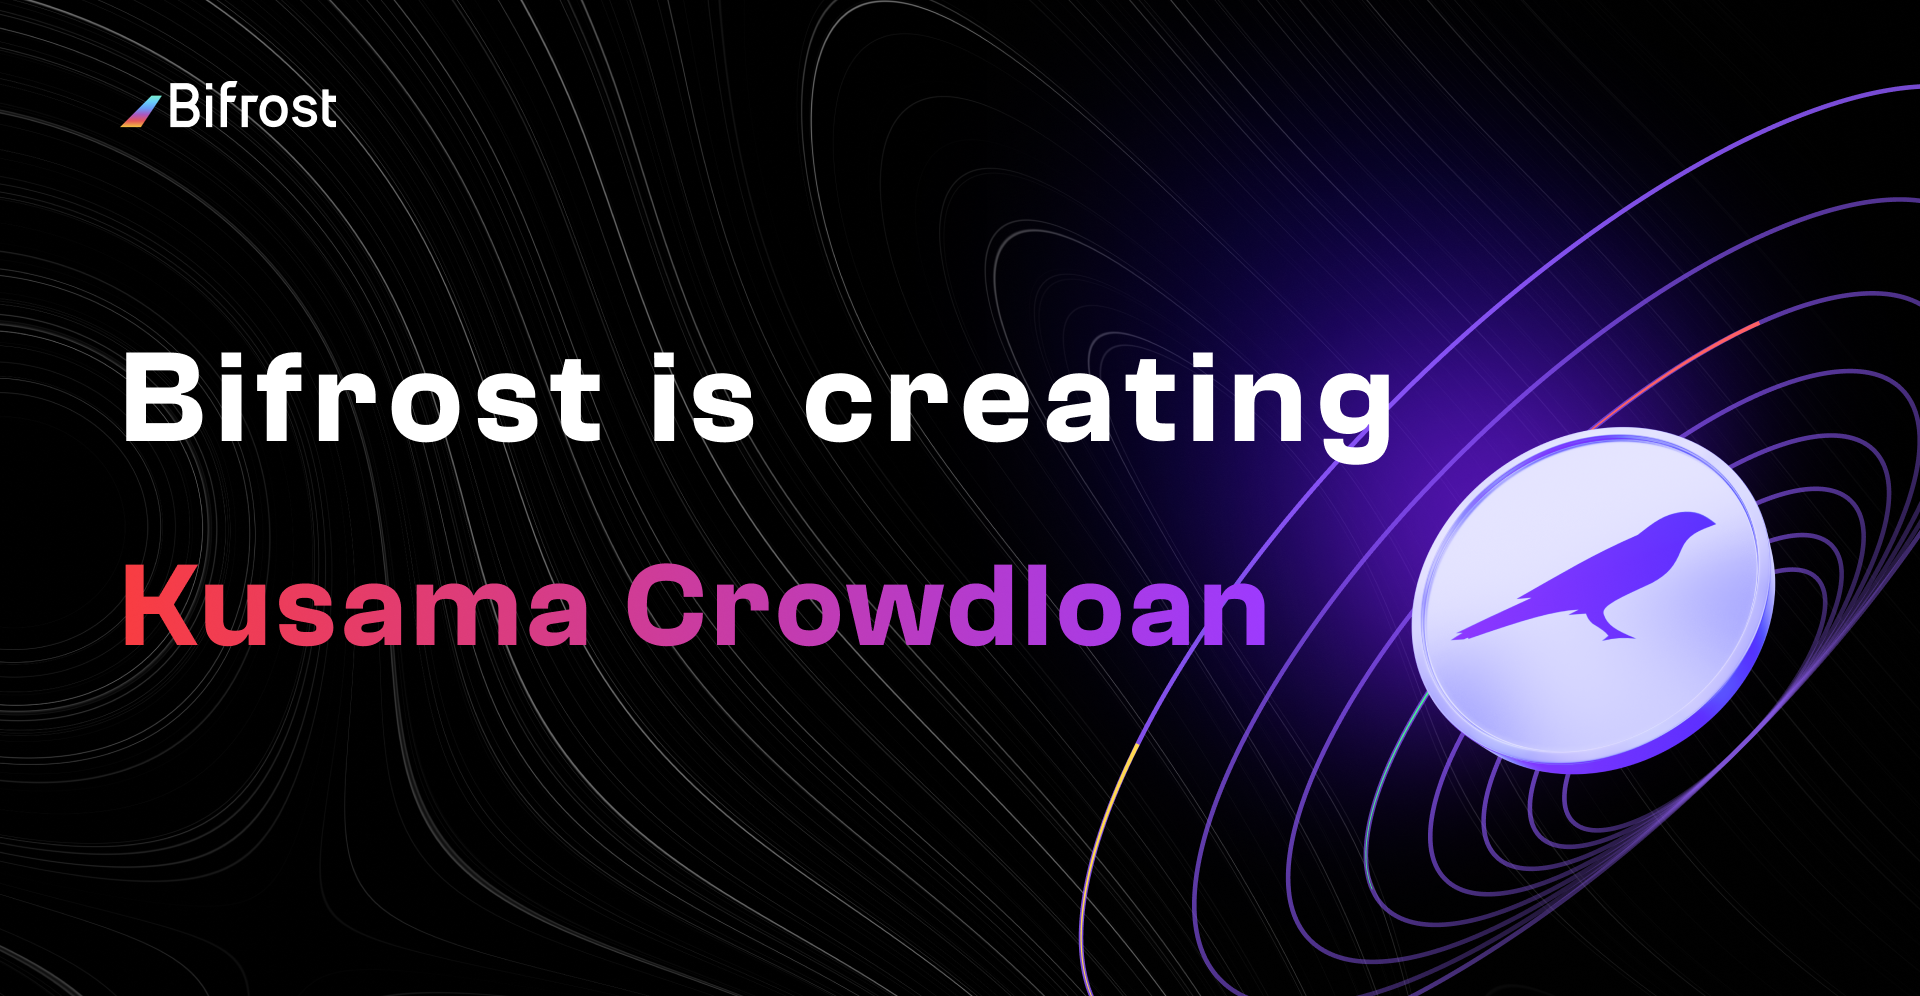 Bifrost Crowdloan channel will be officially opened soon